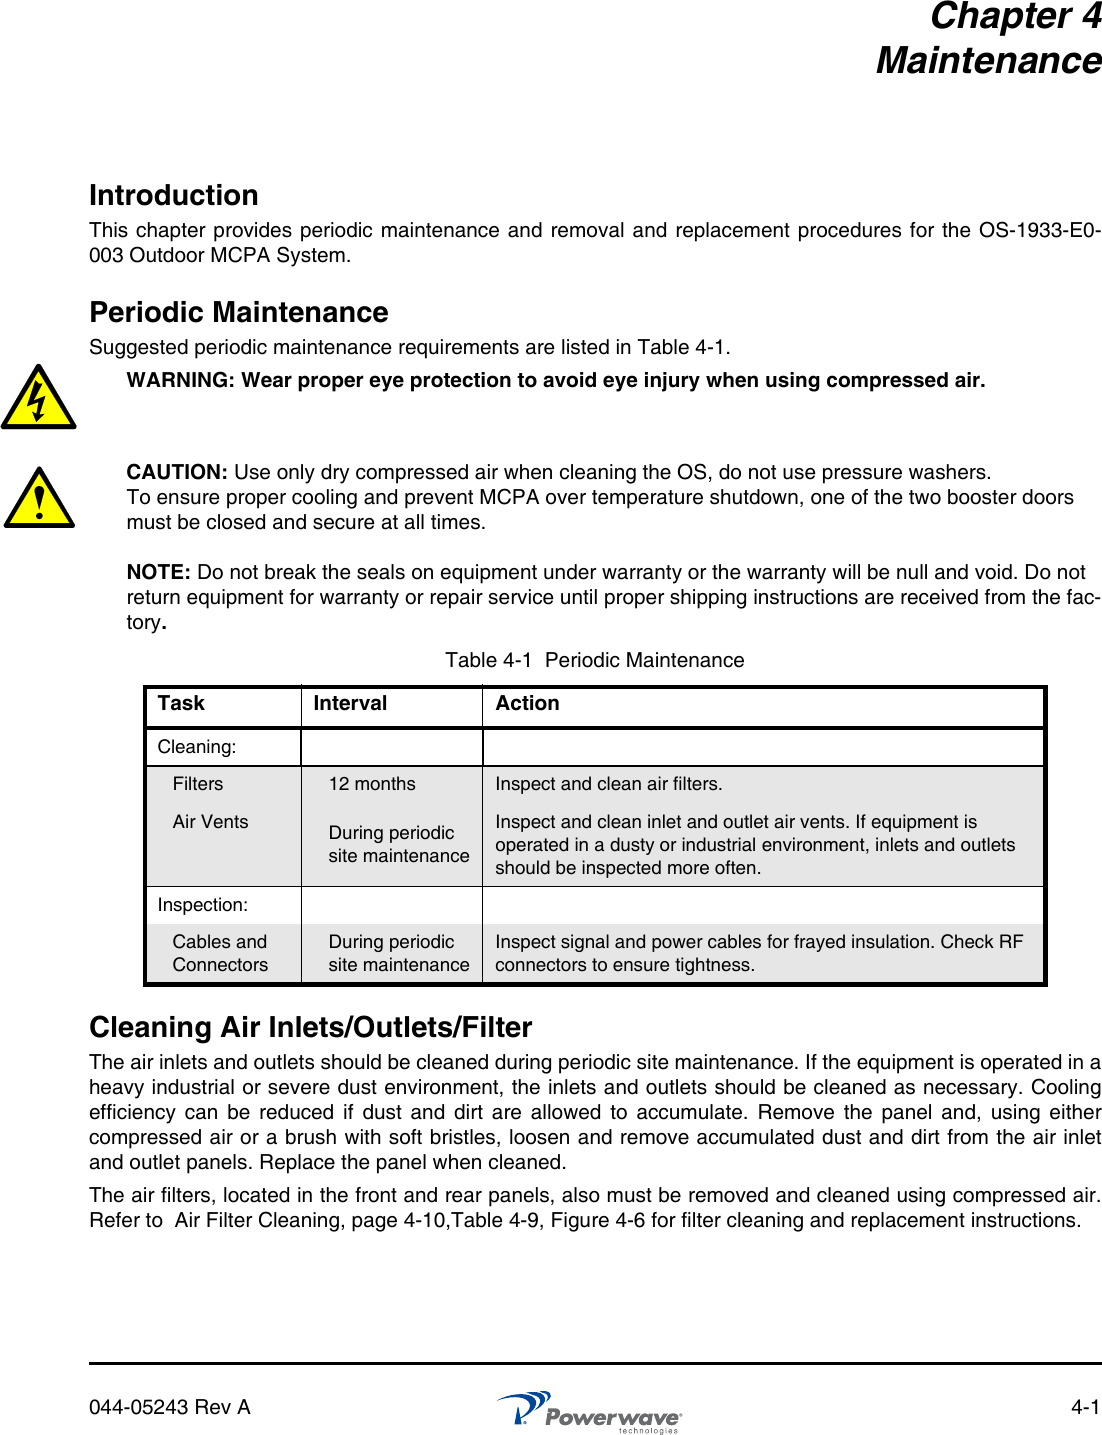 044-05243 Rev A 4-1Chapter 4MaintenanceIntroductionThis chapter provides periodic maintenance and removal and replacement procedures for the OS-1933-E0-003 Outdoor MCPA System.Periodic MaintenanceSuggested periodic maintenance requirements are listed in Table 4-1.WARNING: Wear proper eye protection to avoid eye injury when using compressed air.CAUTION: Use only dry compressed air when cleaning the OS, do not use pressure washers. To ensure proper cooling and prevent MCPA over temperature shutdown, one of the two booster doors must be closed and secure at all times.NOTE: Do not break the seals on equipment under warranty or the warranty will be null and void. Do not return equipment for warranty or repair service until proper shipping instructions are received from the fac-tory.Cleaning Air Inlets/Outlets/FilterThe air inlets and outlets should be cleaned during periodic site maintenance. If the equipment is operated in aheavy industrial or severe dust environment, the inlets and outlets should be cleaned as necessary. Coolingefficiency can be reduced if dust and dirt are allowed to accumulate. Remove the panel and, using eithercompressed air or a brush with soft bristles, loosen and remove accumulated dust and dirt from the air inletand outlet panels. Replace the panel when cleaned.The air filters, located in the front and rear panels, also must be removed and cleaned using compressed air.Refer to  Air Filter Cleaning, page 4-10,Table 4-9, Figure 4-6 for filter cleaning and replacement instructions.Table 4-1  Periodic MaintenanceTask Interval ActionCleaning:Filters 12 months Inspect and clean air filters.Air Vents During periodic site maintenanceInspect and clean inlet and outlet air vents. If equipment is operated in a dusty or industrial environment, inlets and outlets should be inspected more often.Inspection:Cables and ConnectorsDuring periodic site maintenanceInspect signal and power cables for frayed insulation. Check RF connectors to ensure tightness.